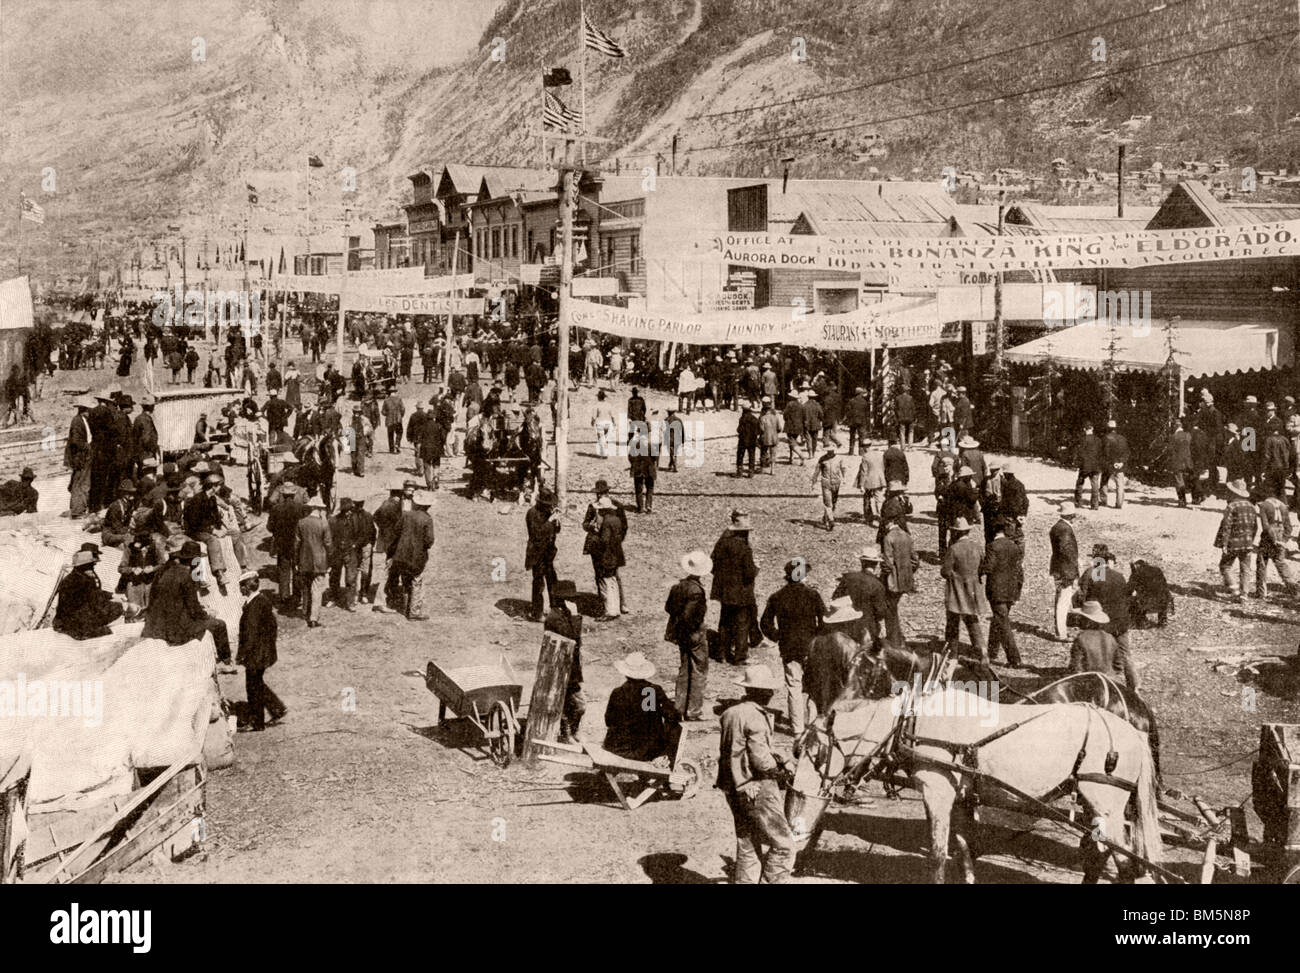 Miners and new settlers crowding Dawson City during the Klondyke Gold Rush, 1900. Halftone of a photograph Stock Photo